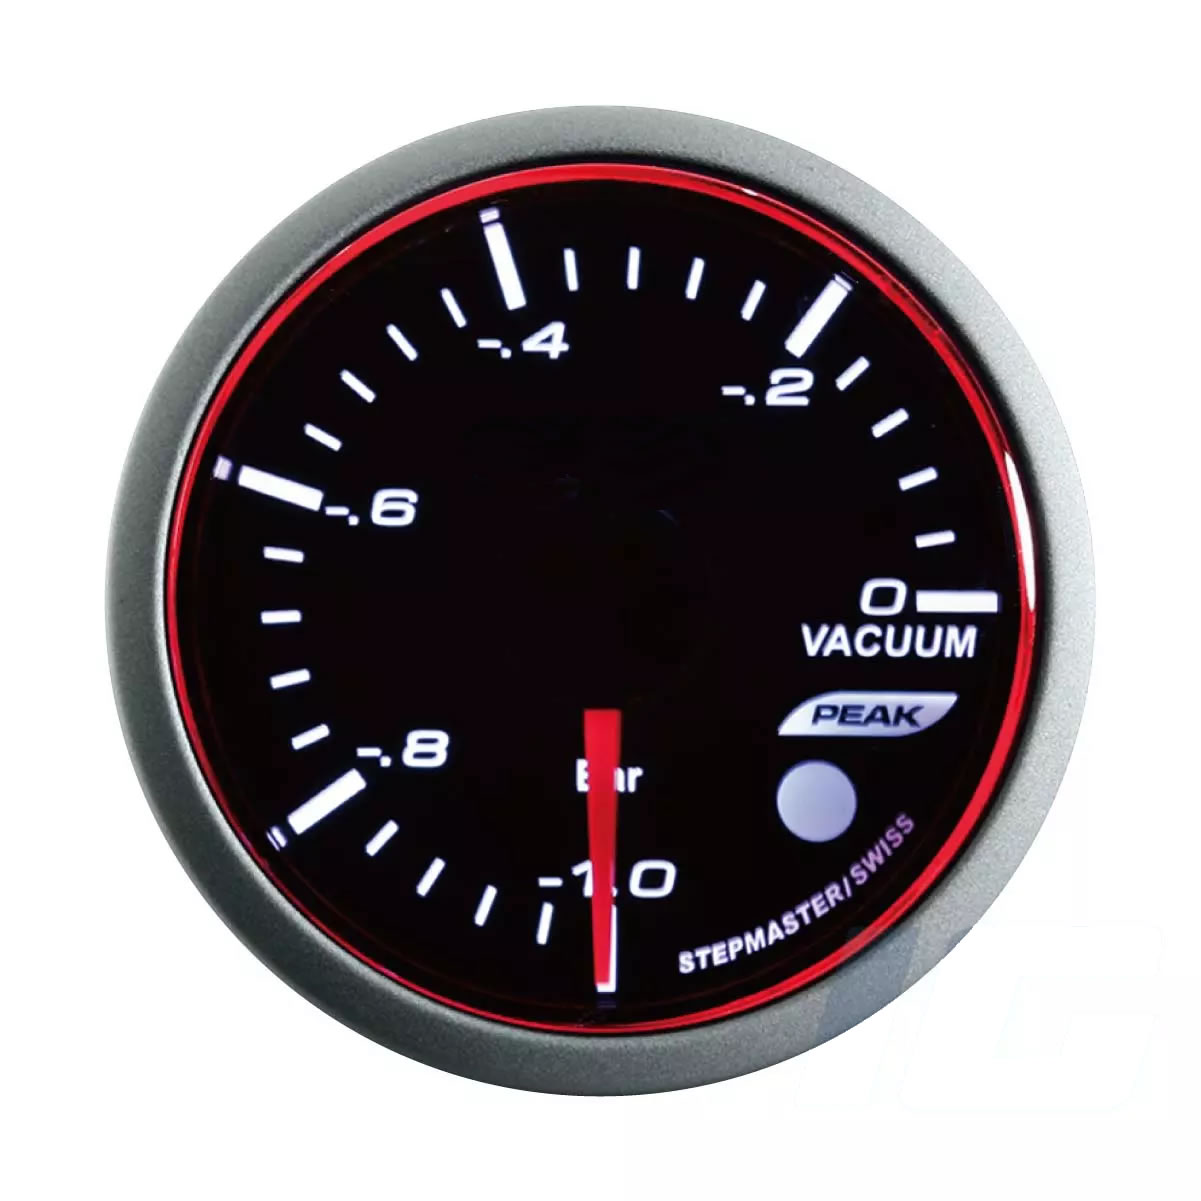 52mm White and Blue and Amber LED Performance Car Gauges - Vacuum Gauge With Sensor and Warning and Peak For Your Sport Racing Car